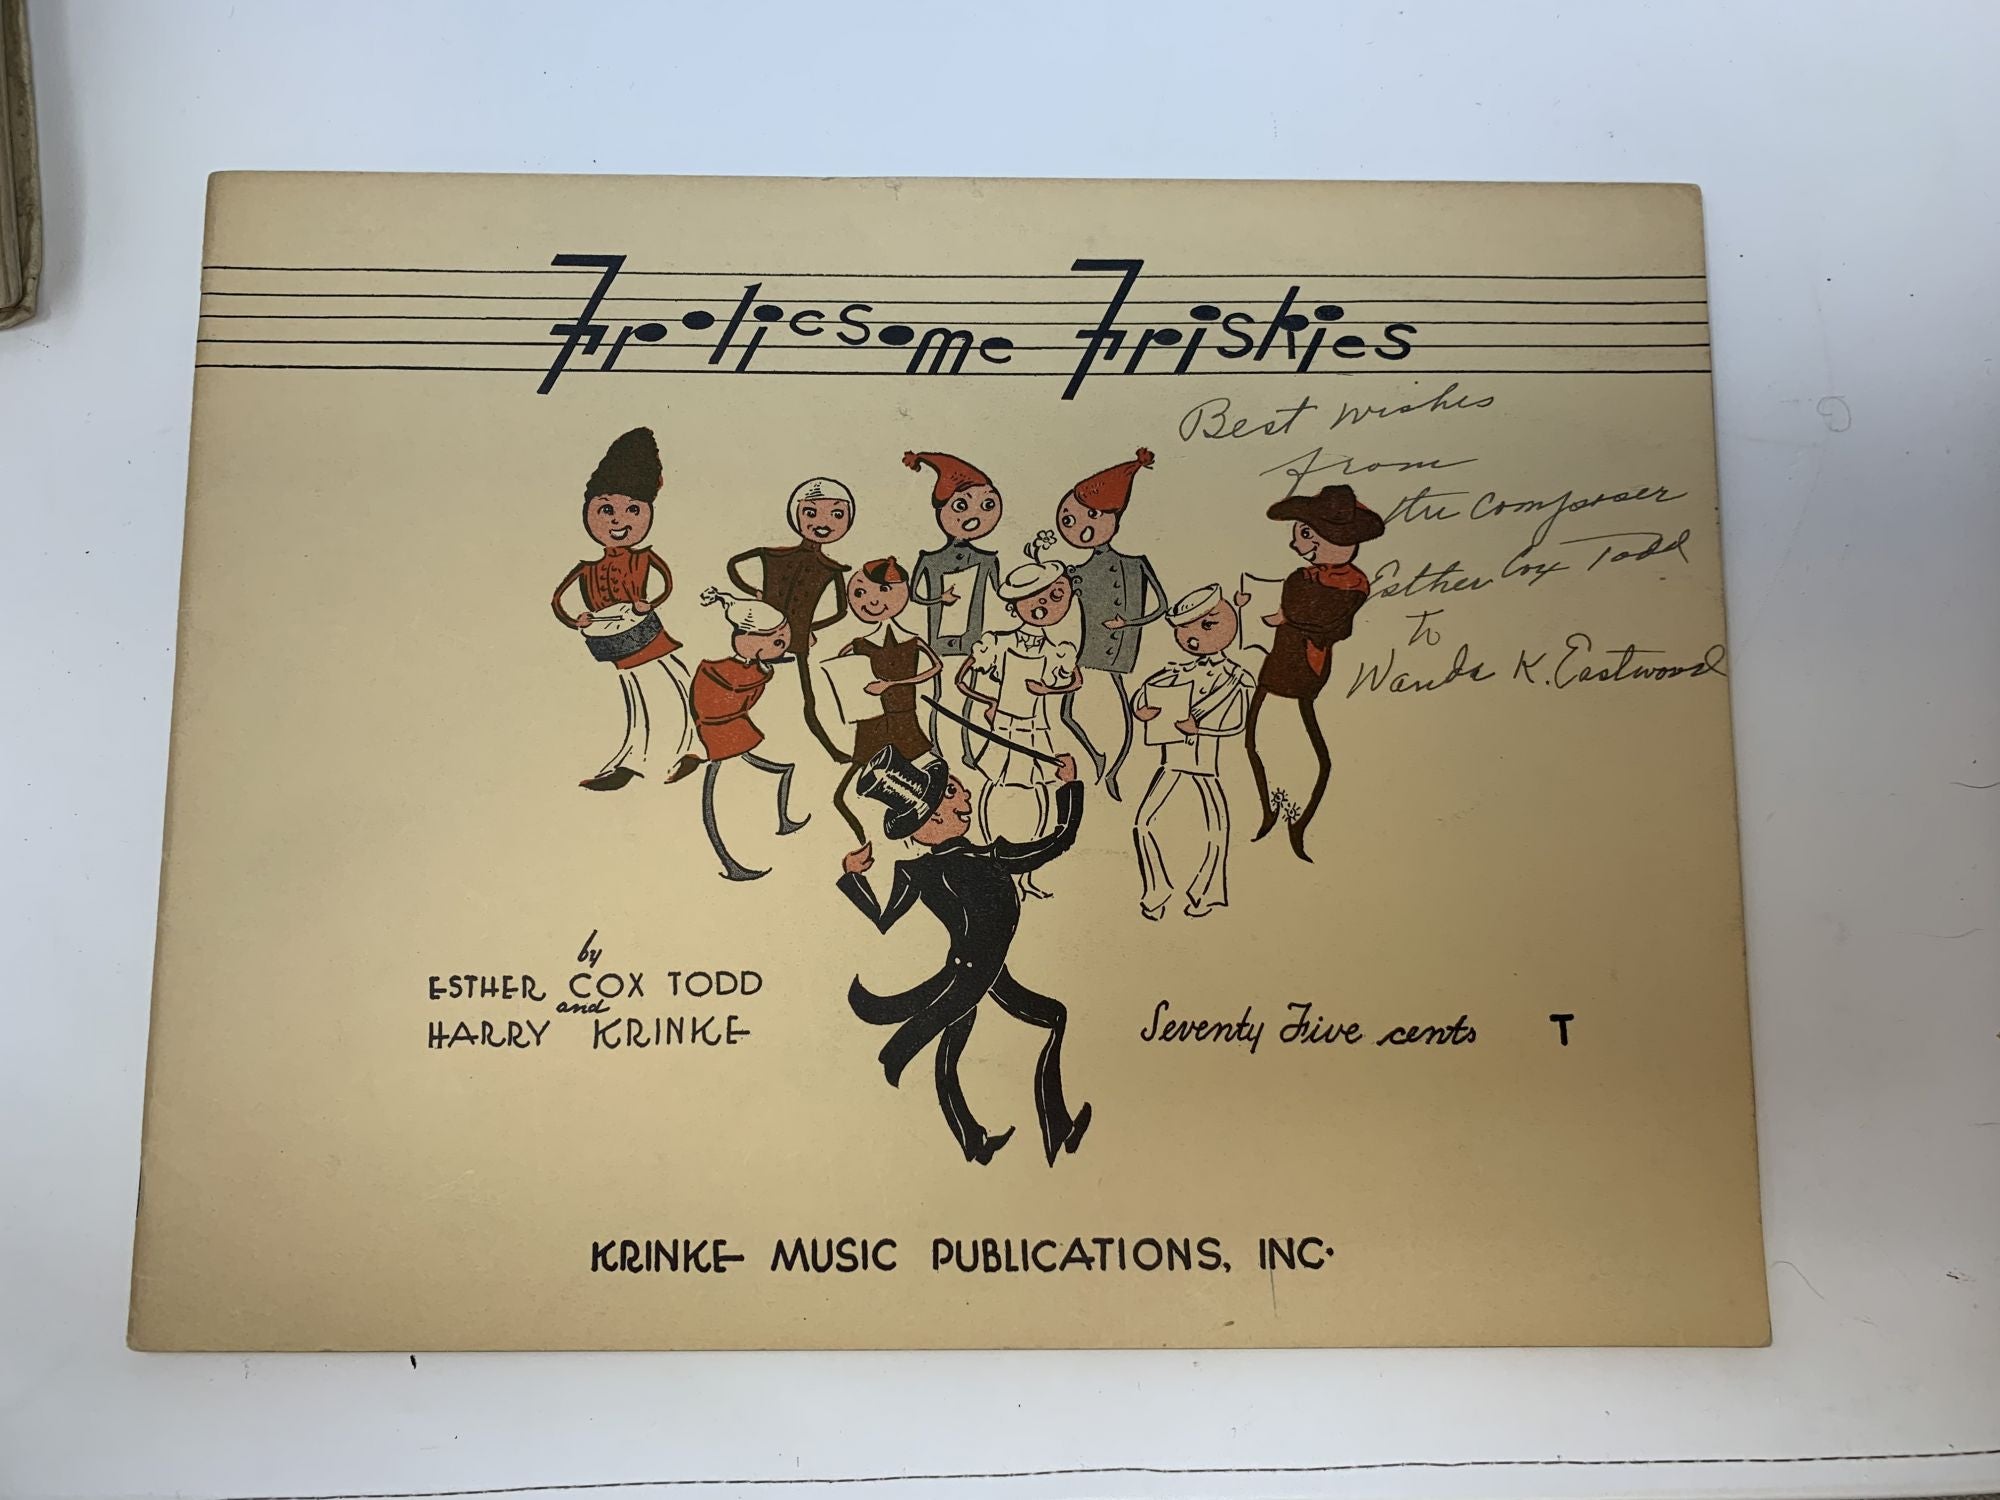 Todd, Esther Cox and Harry Krinke - Frolicsome Friskies (Signed)